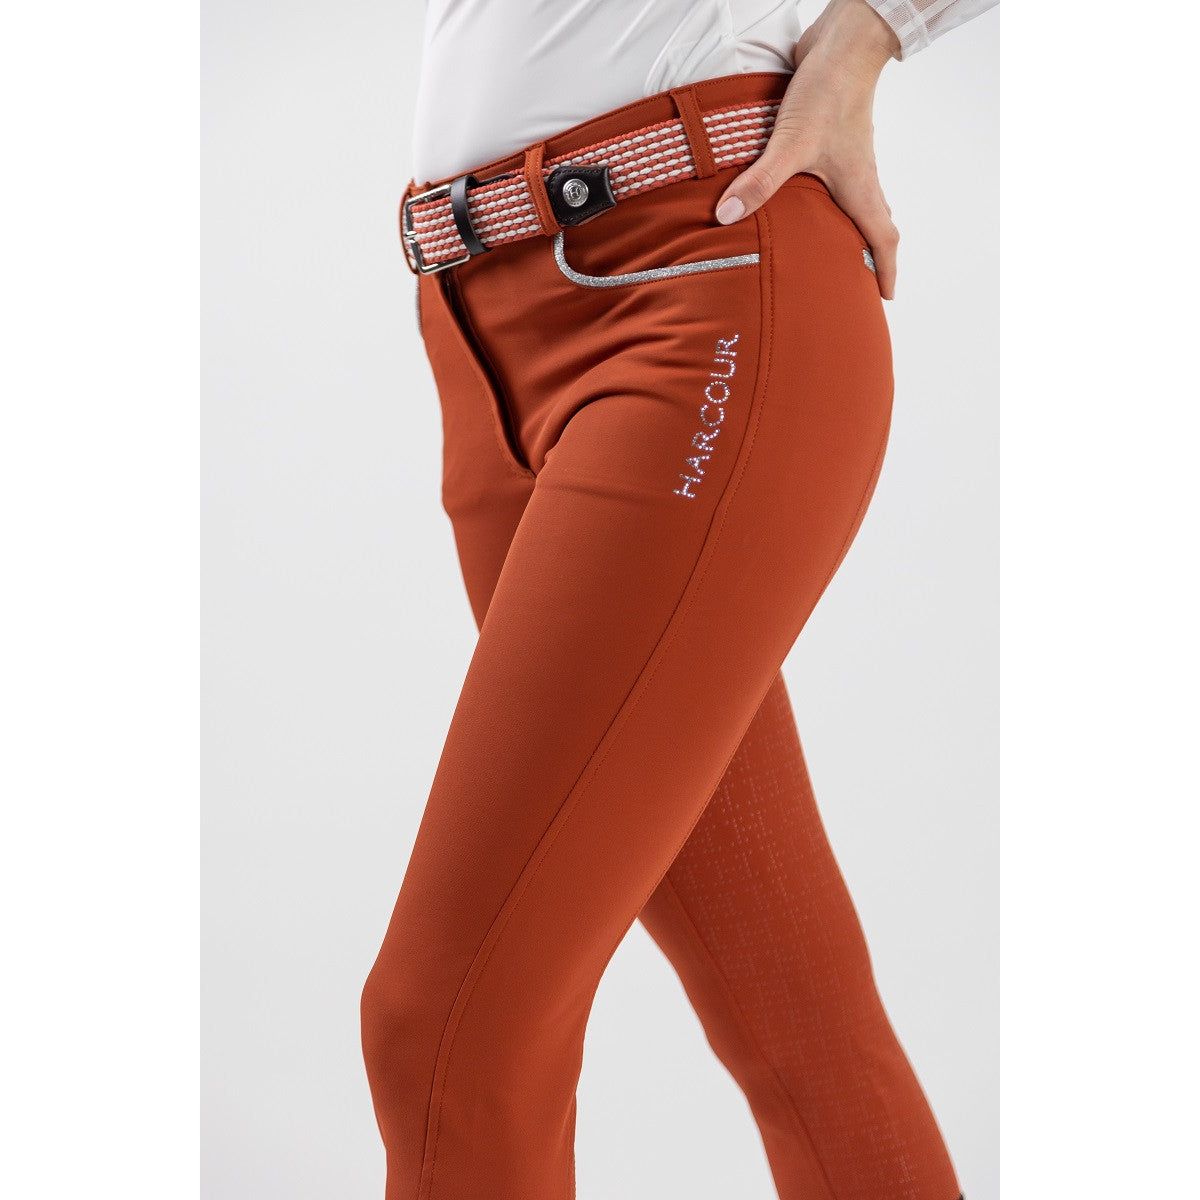 HARCOUR CLOTHING Harcour Vogue Womens Breeches in Terracotta